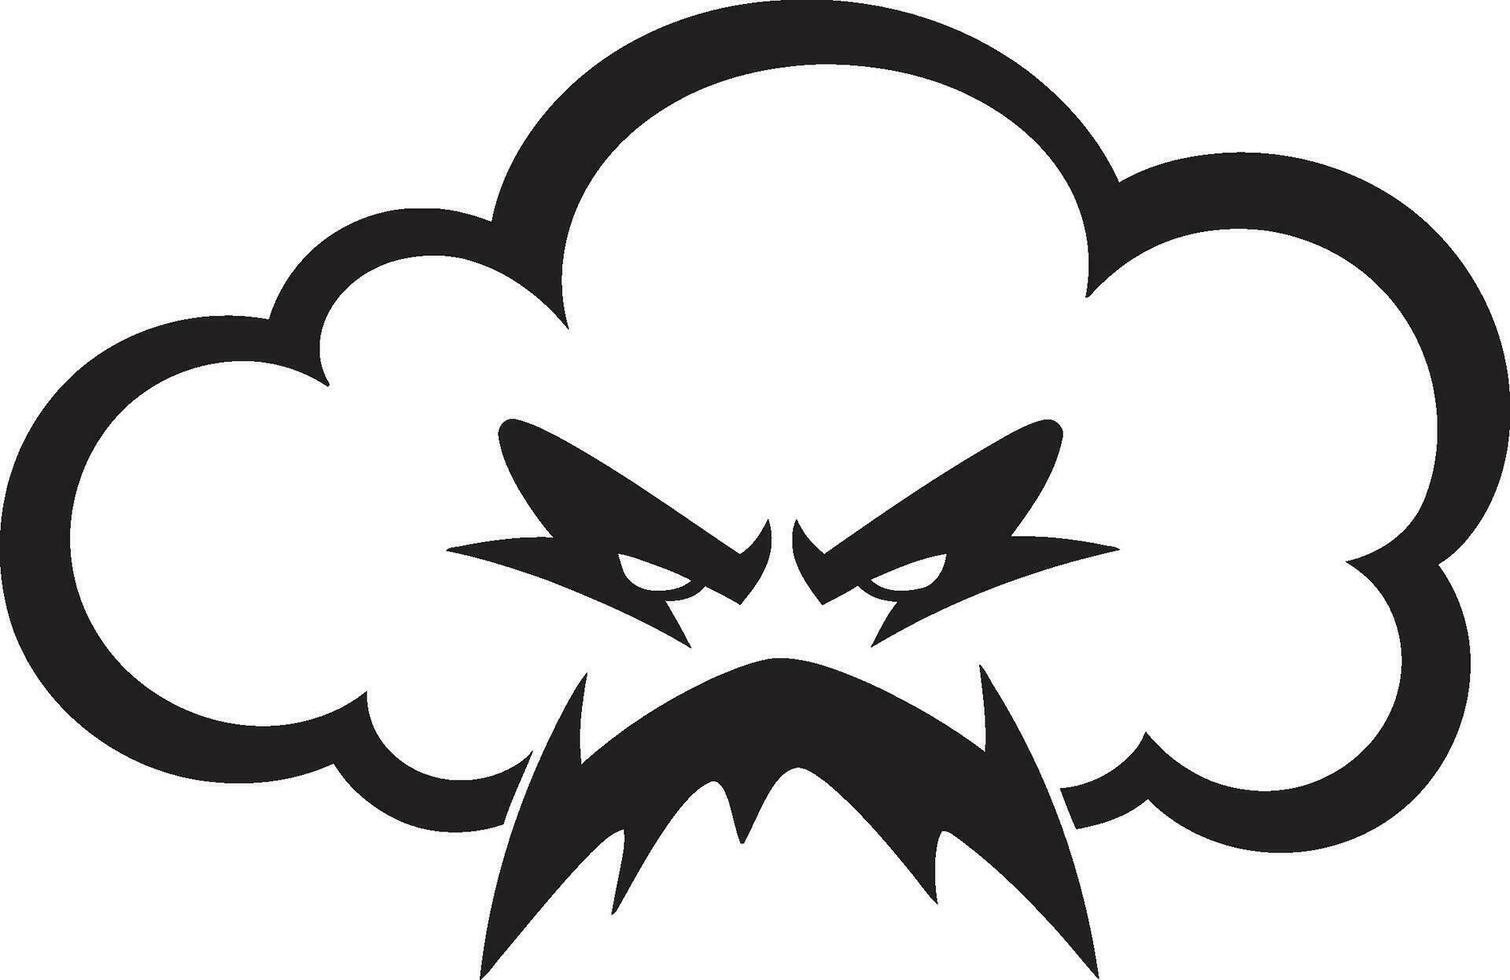 Raging Storm Black Cloud Logo Icon Turbulent Fury Angry Vector Cloud Design